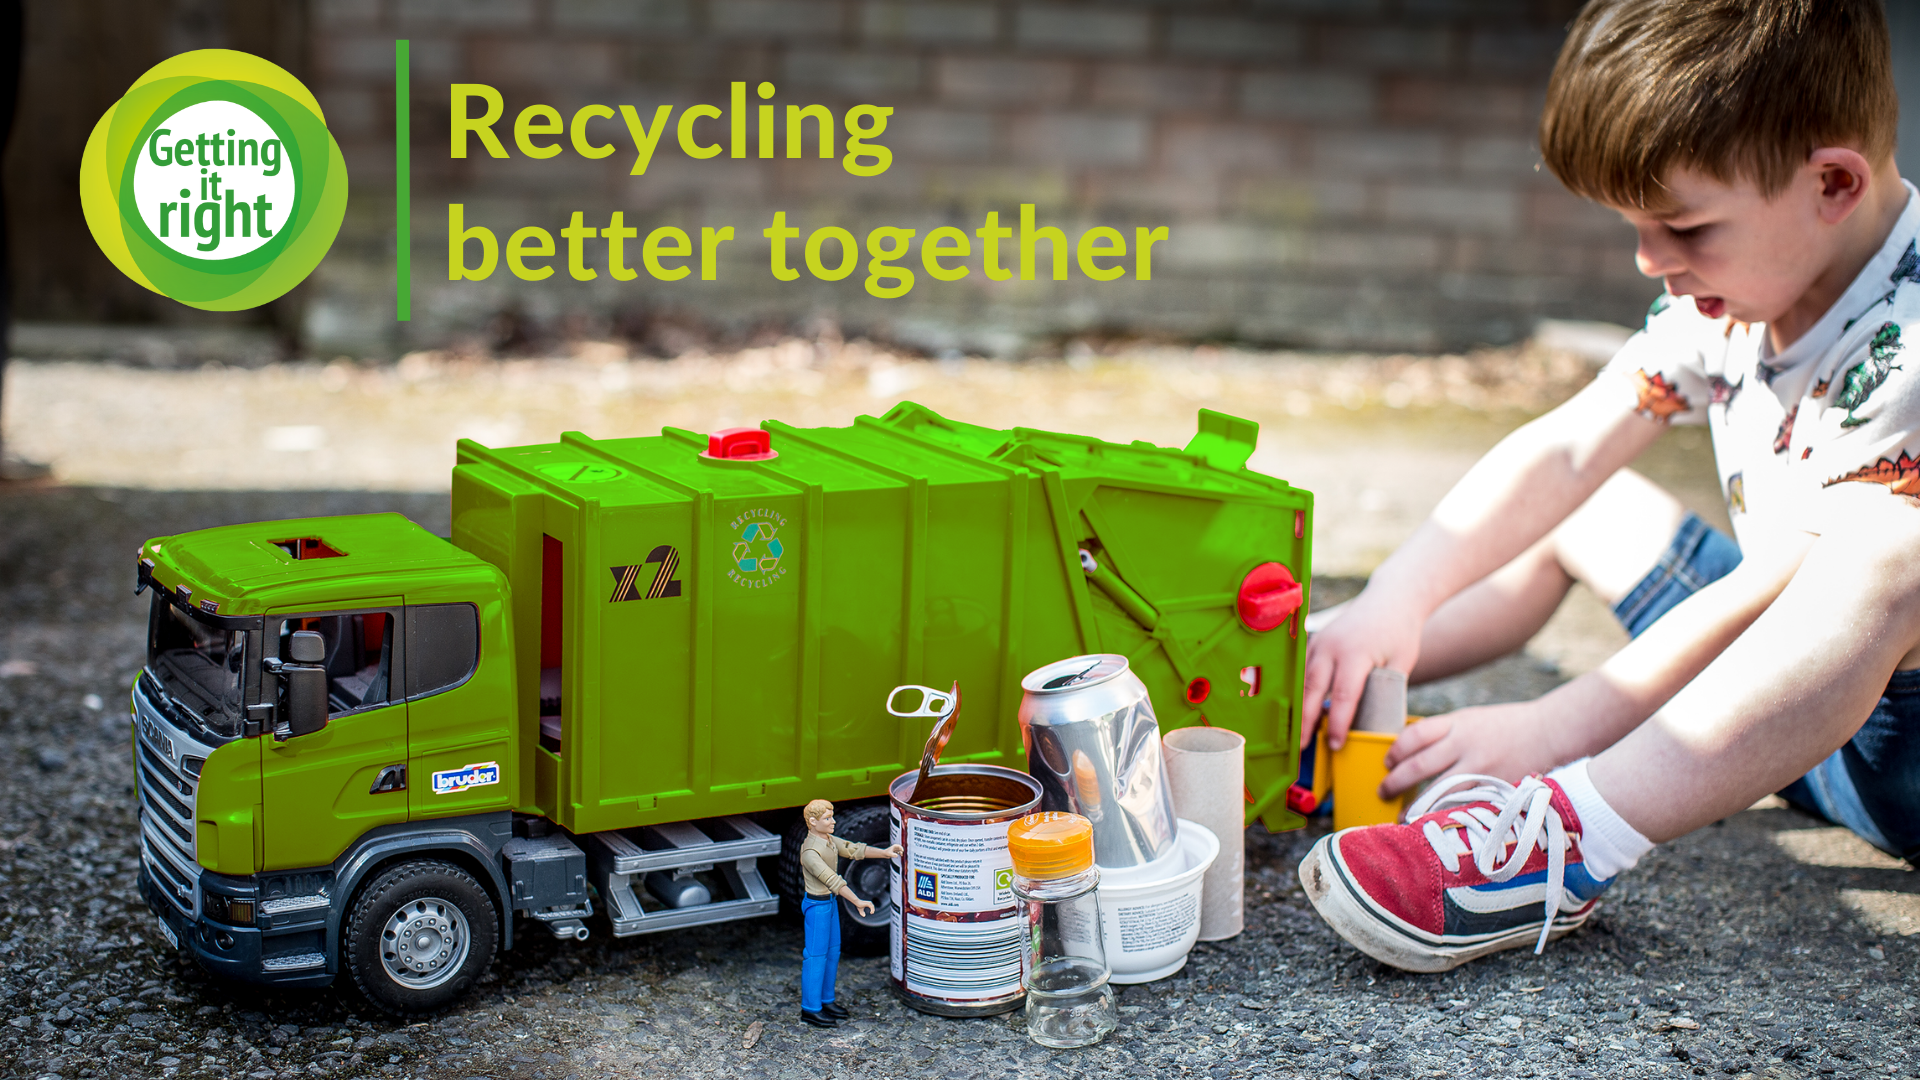 Child plays with toy rubbish lorry alongside some items to be recycled